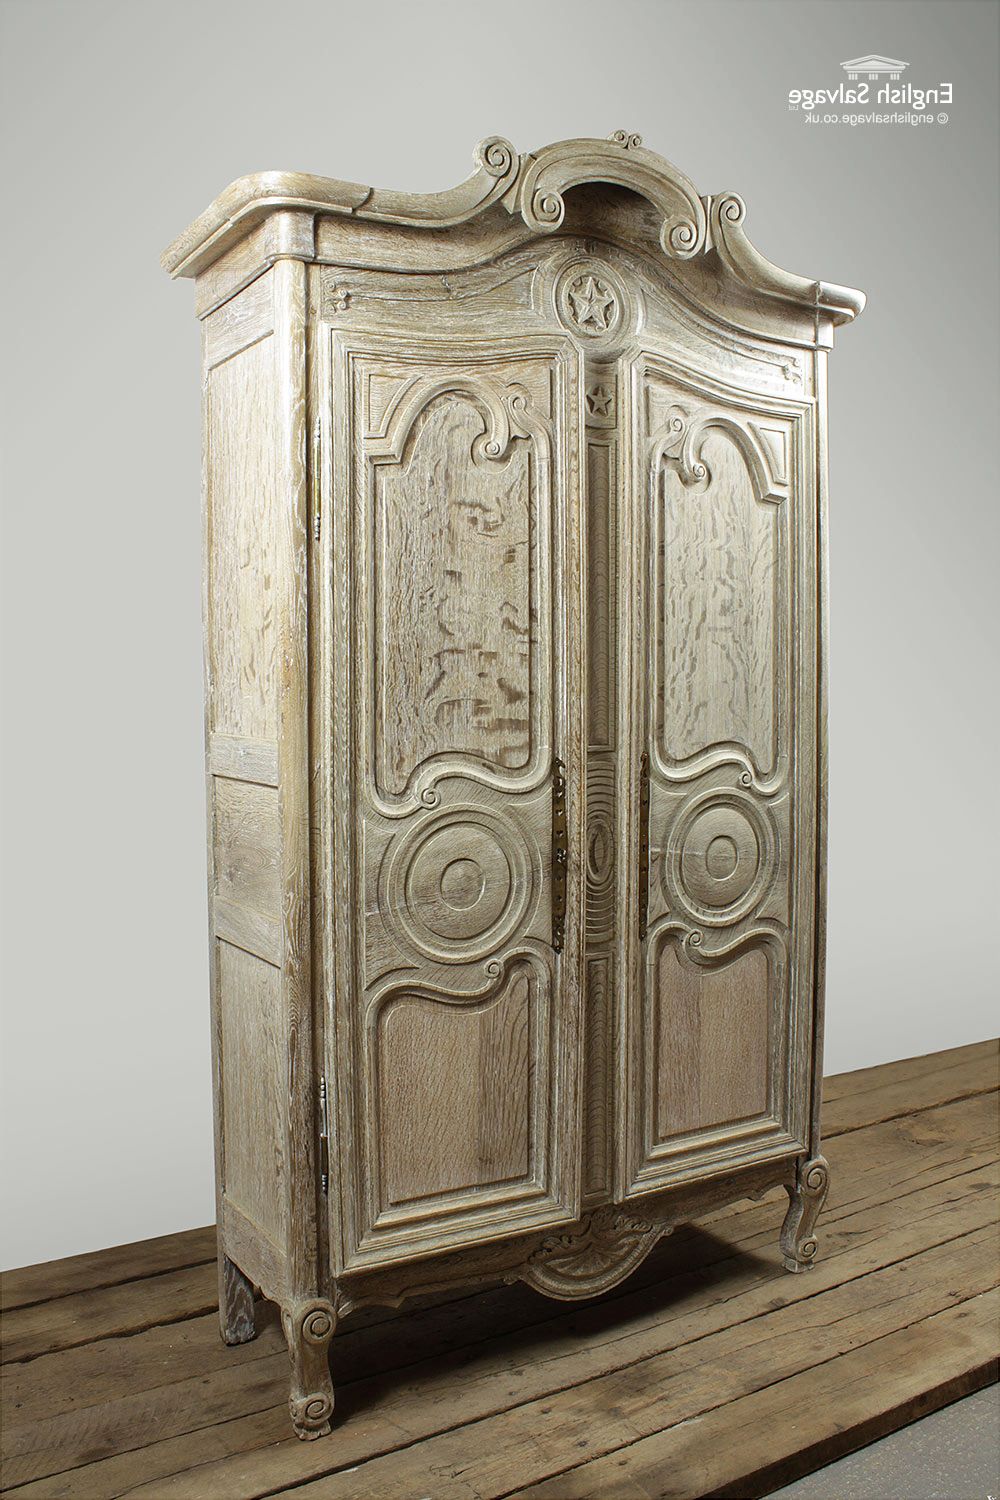 Antique Ornate Oak Armoire Wardrobe For Ornate Wardrobes (View 12 of 20)